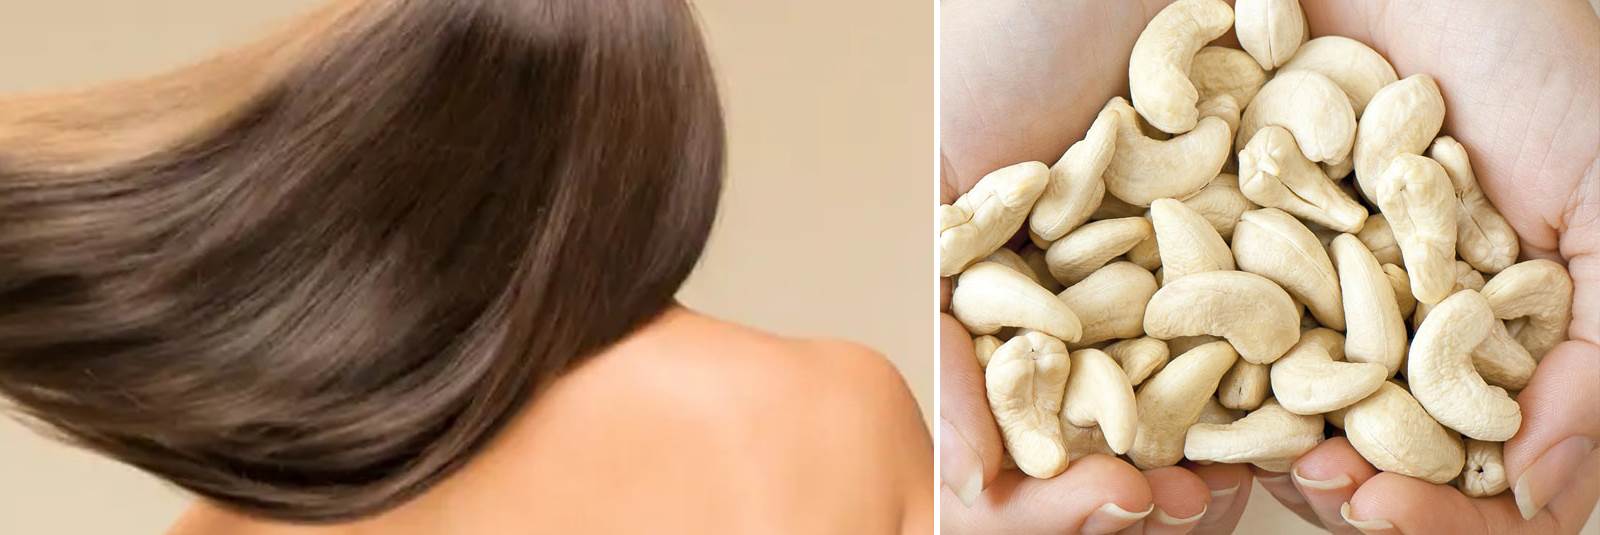 Side Effects Of Eating Too Many Cashew Nuts | Kimmy Farm